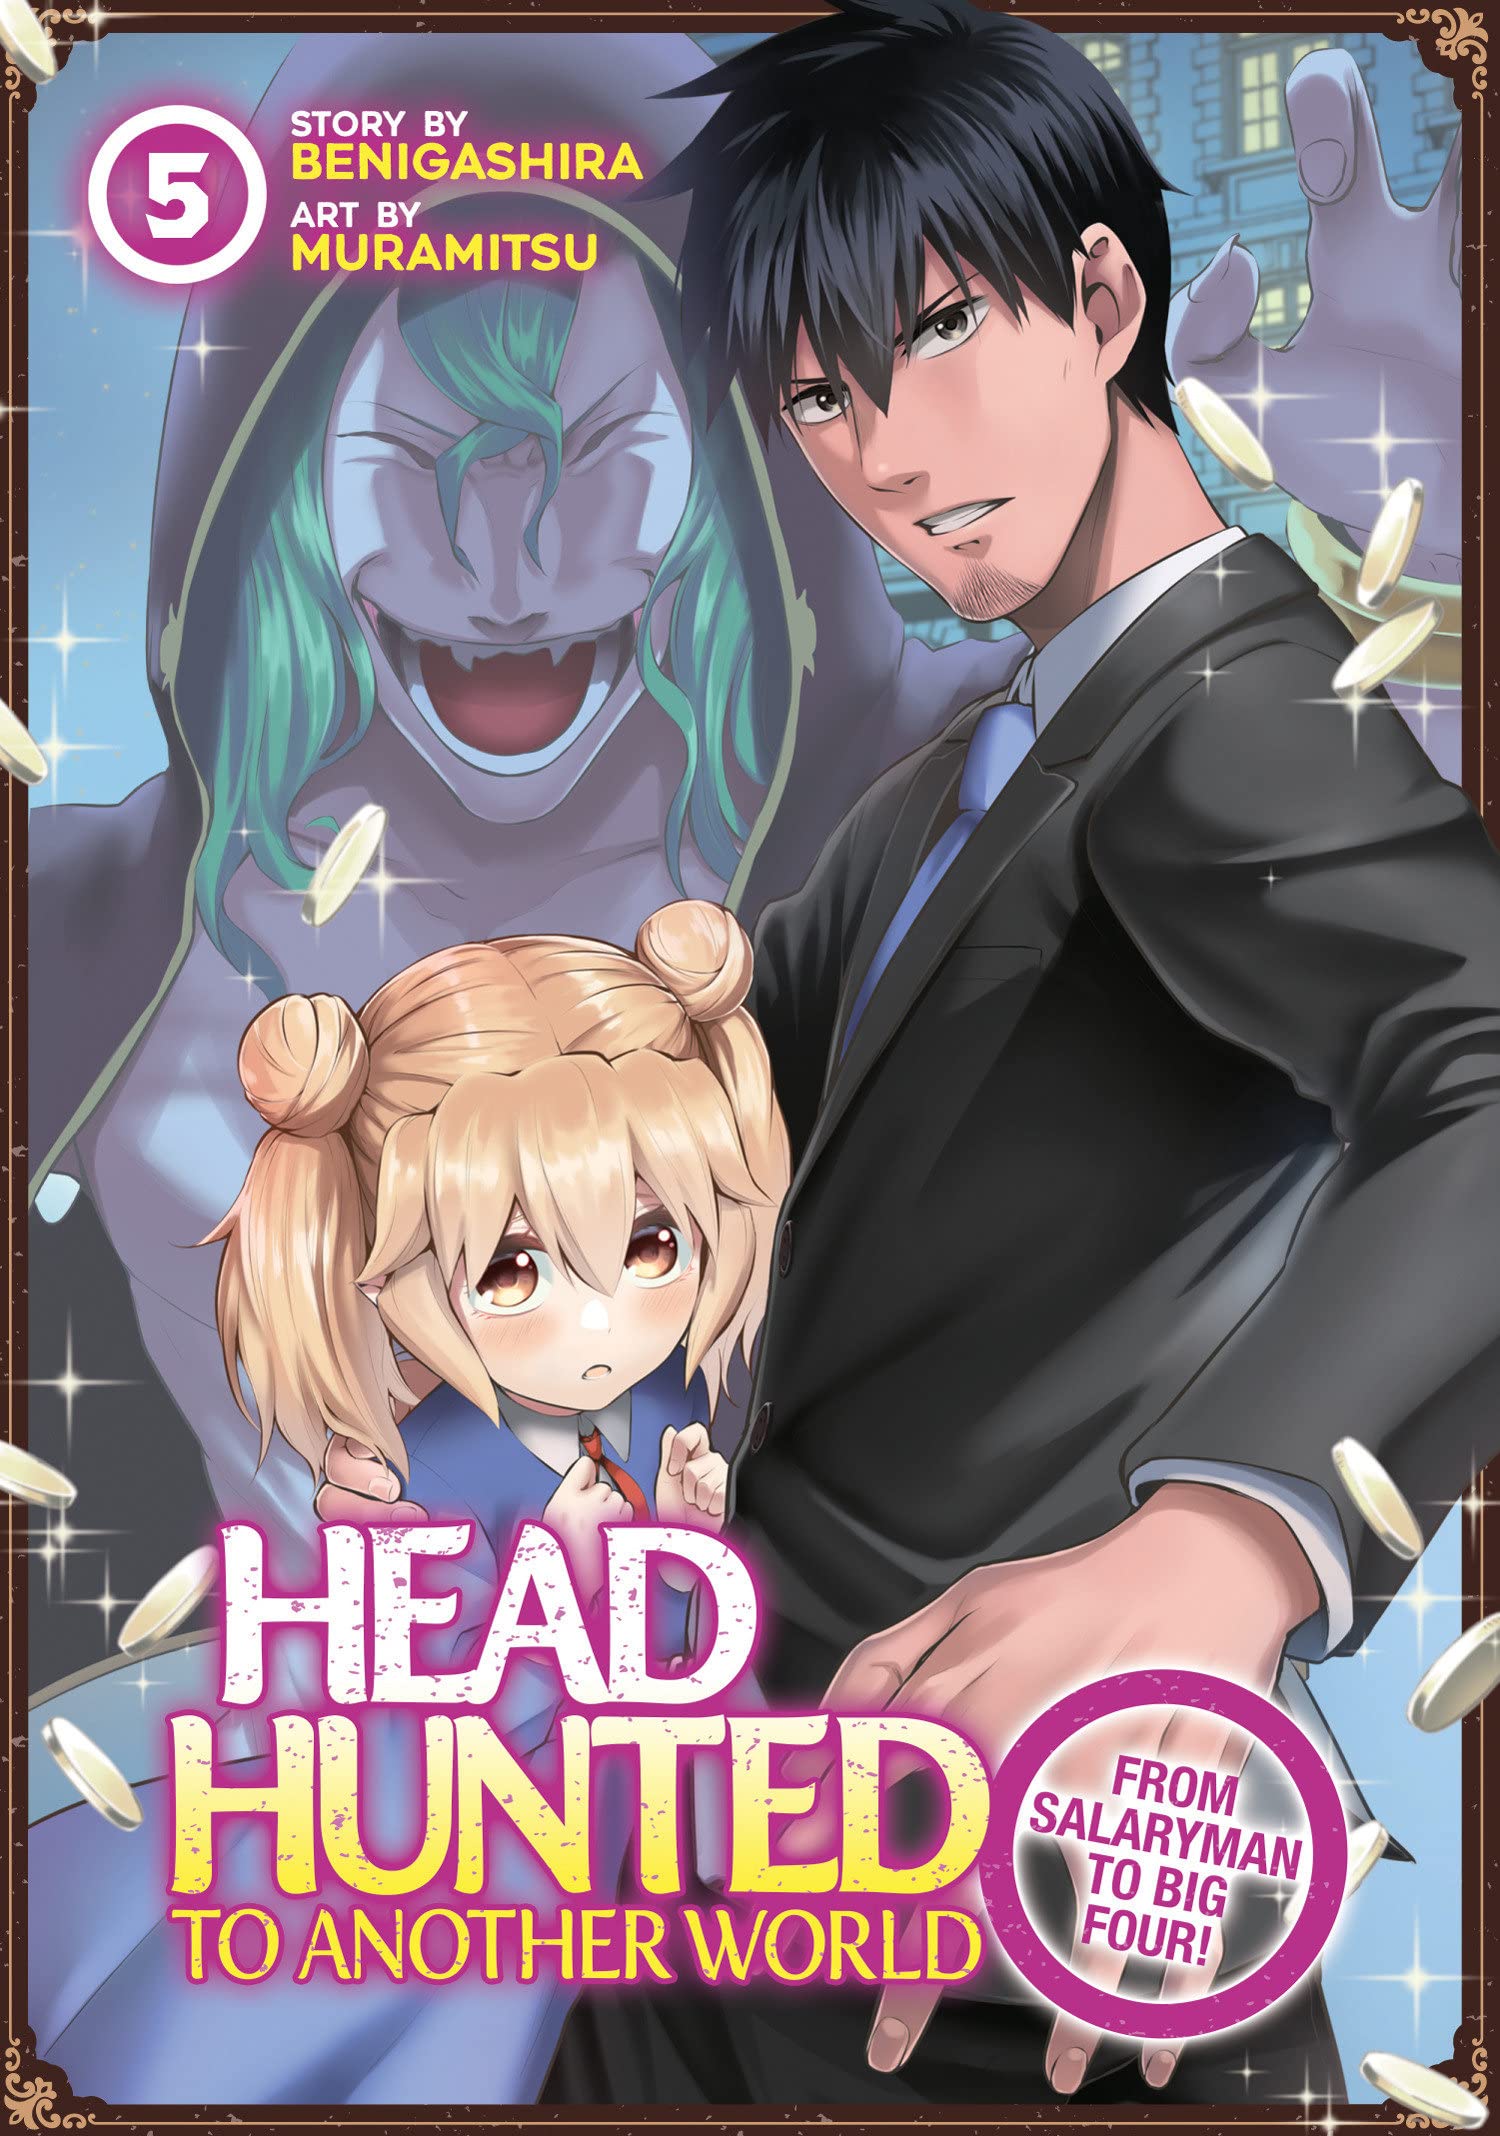 Headhunted to Another World: From Salaryman to Big Four! Vol. 05